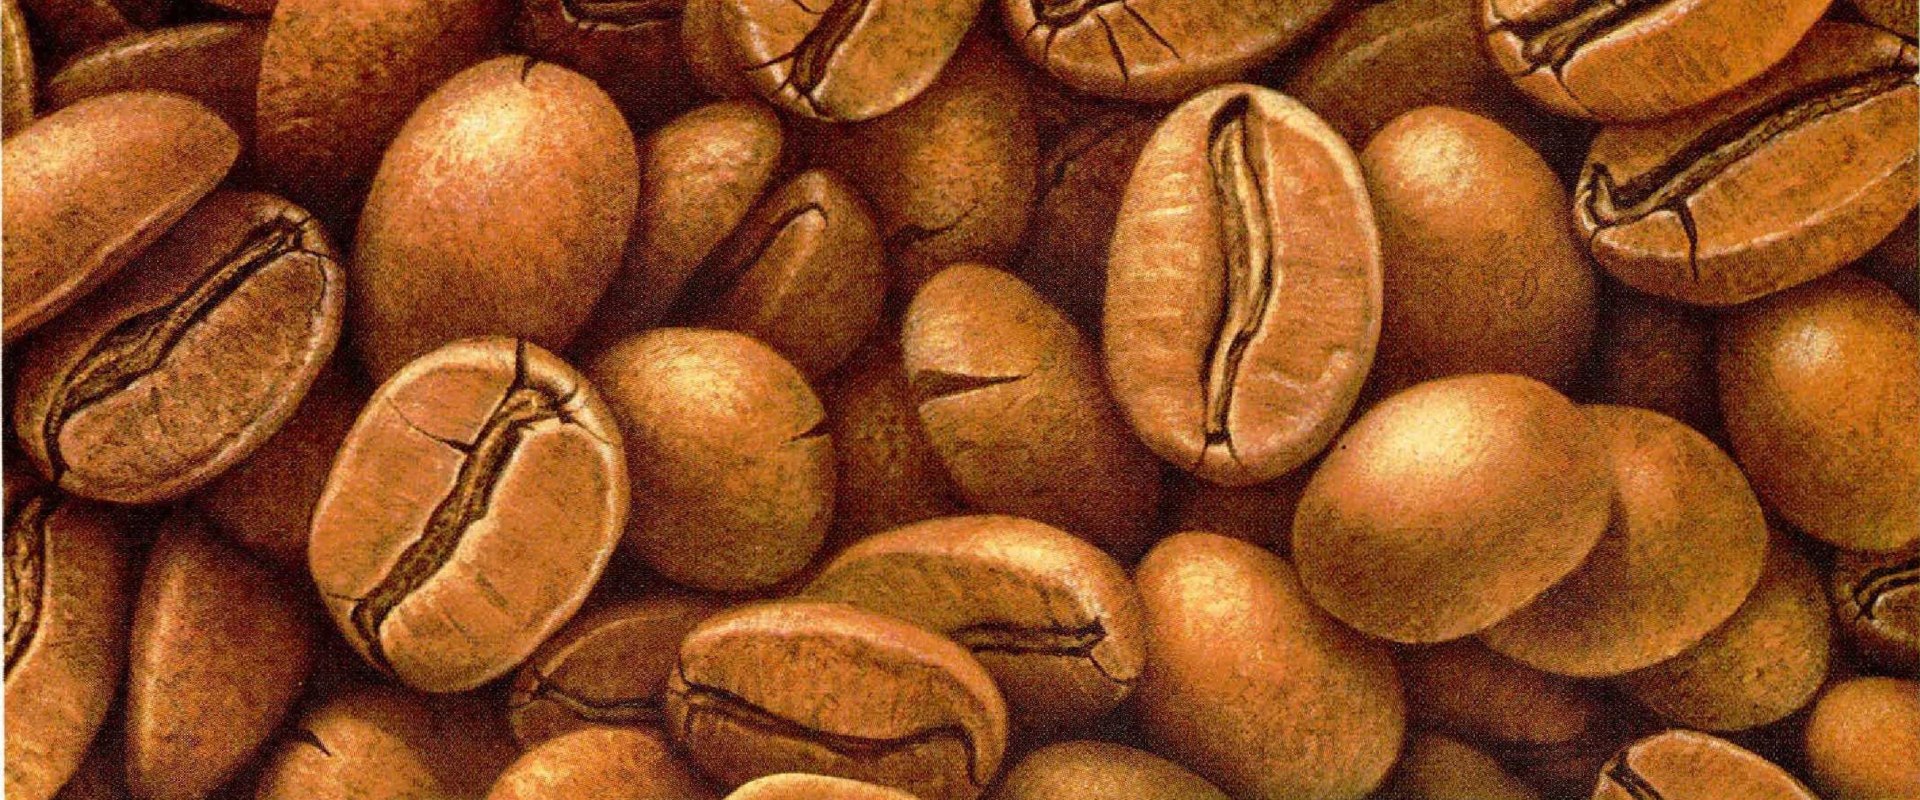 The Fascinating History of Coffee: From Kaldi to Starbucks